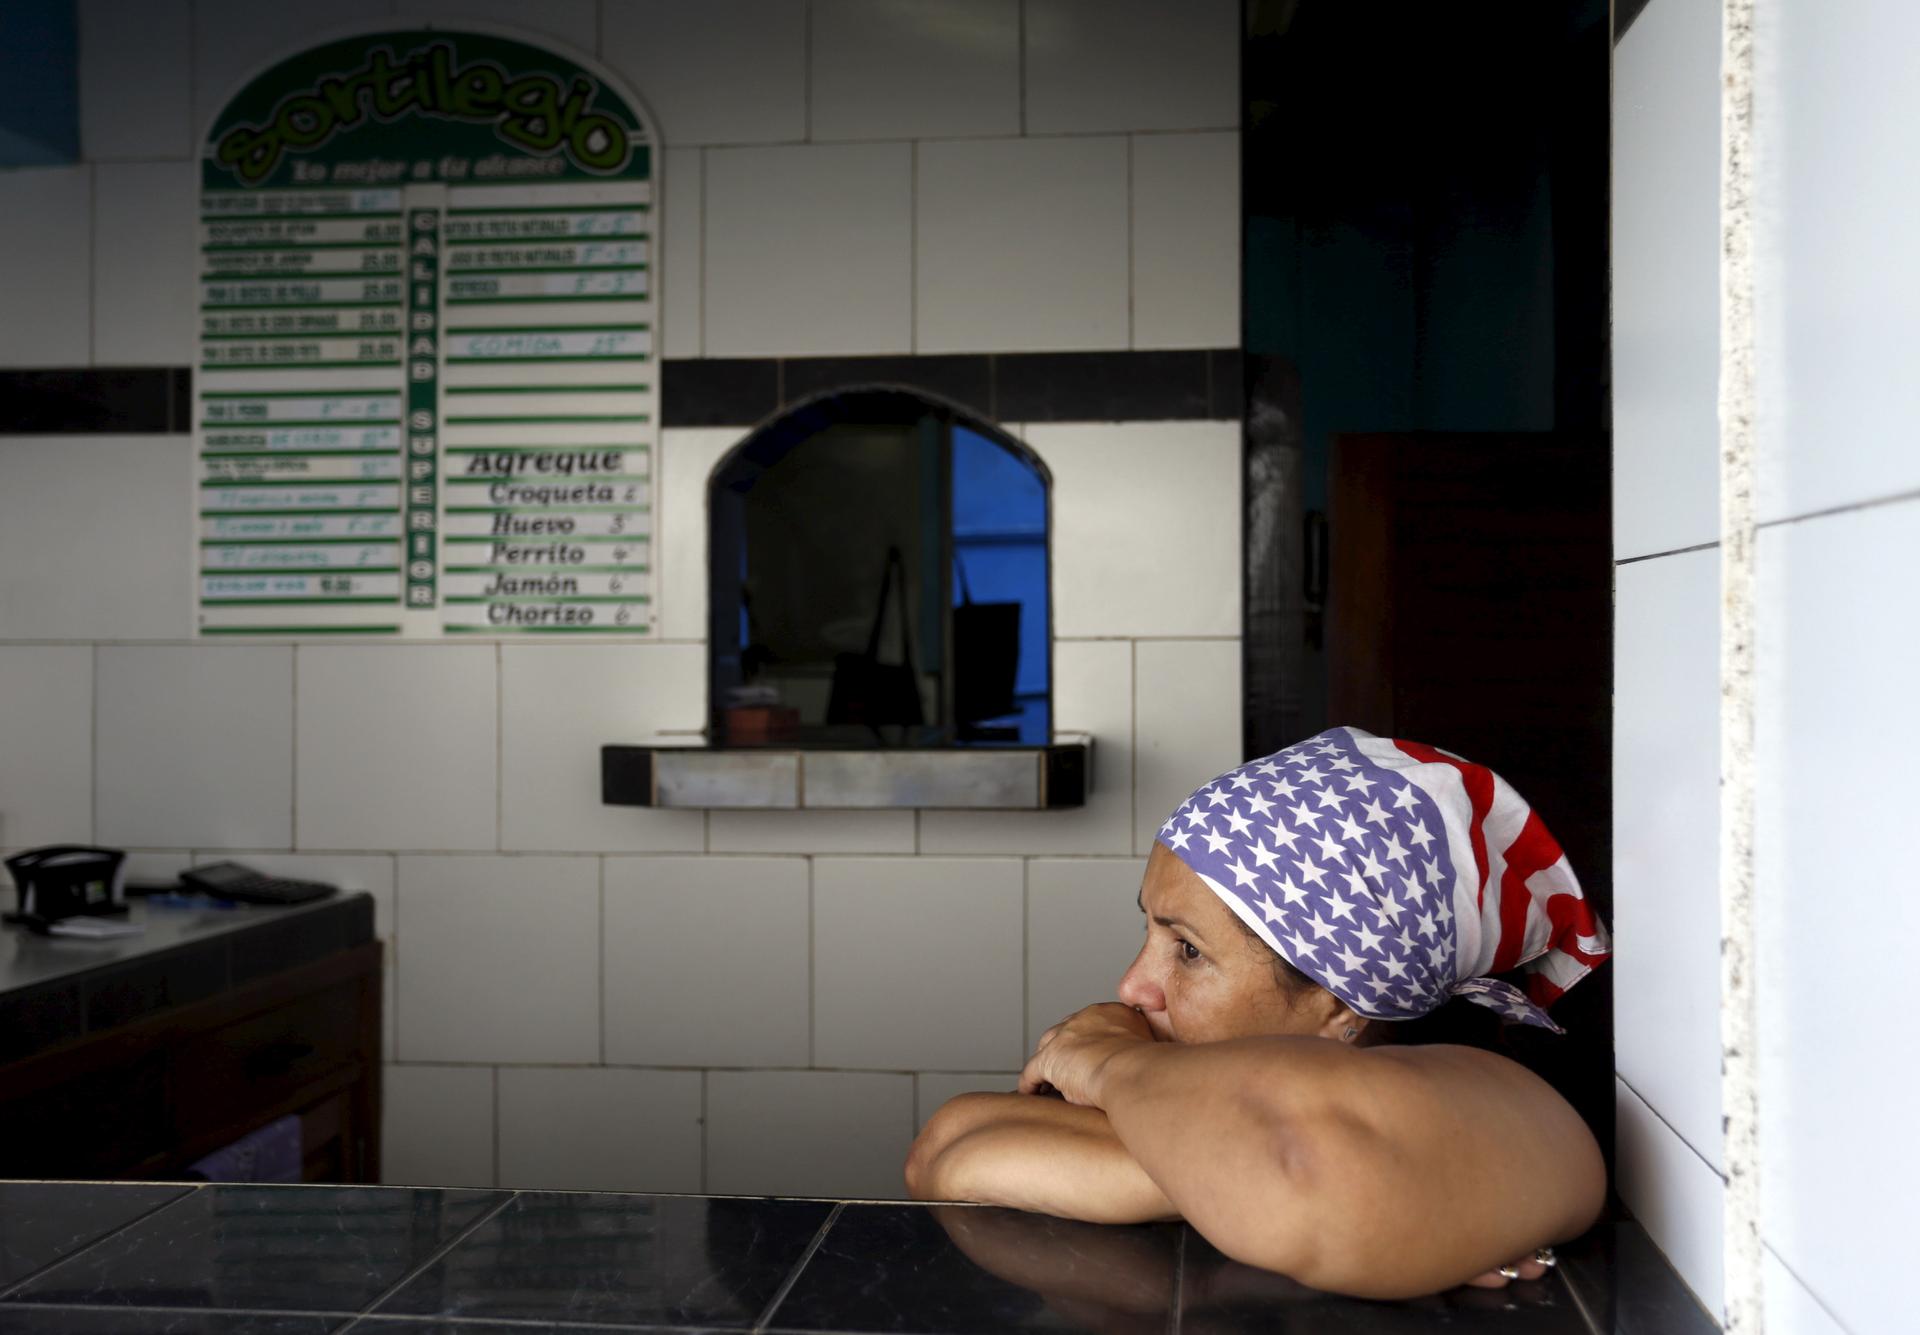 A Cuban woman waits for costumers in her private cafeteria, while wearing a scarf with the colors of the US flag, in Havana April 11, 2015.